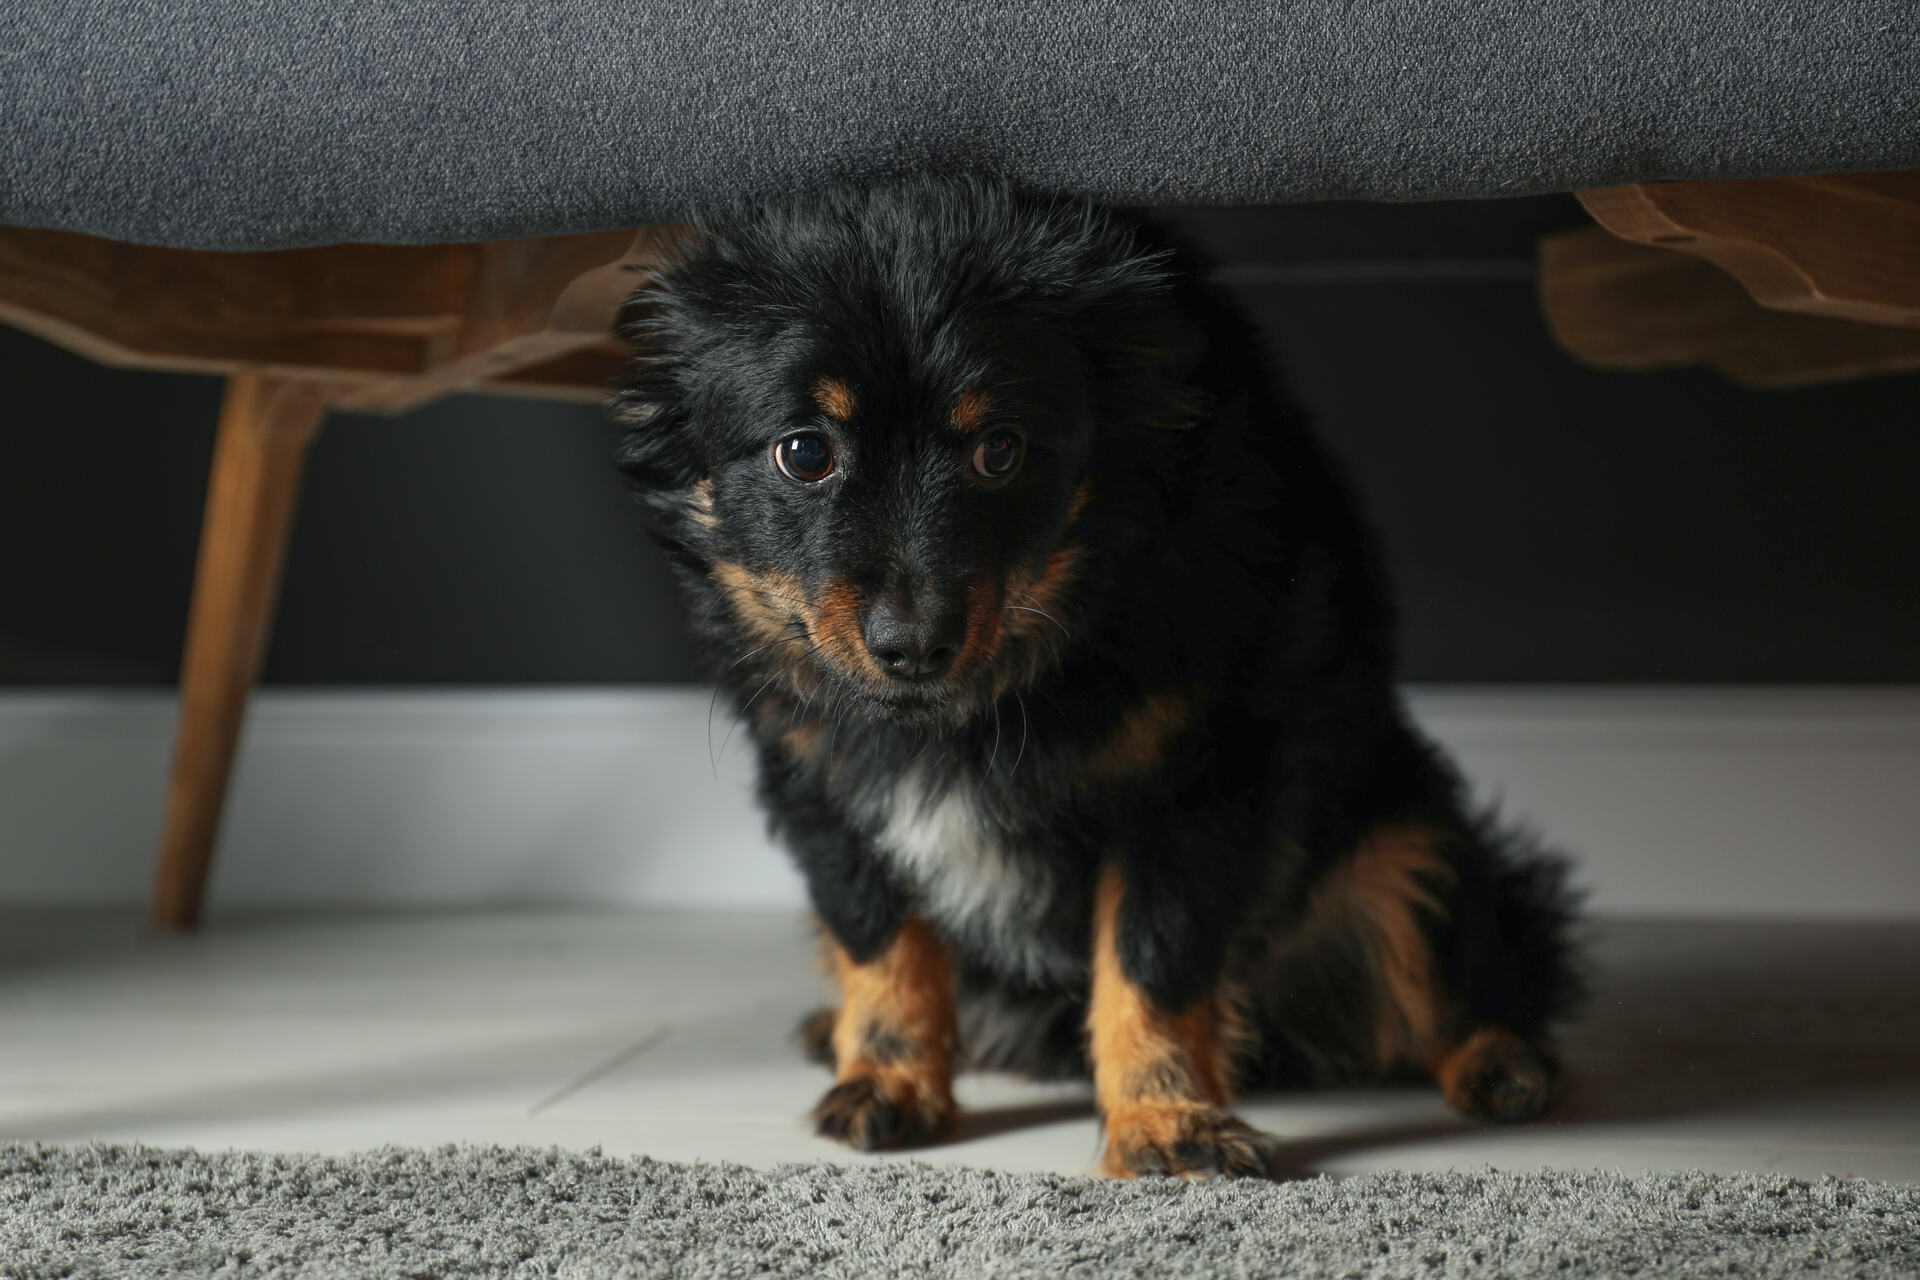 A scared dog hiding under a couch